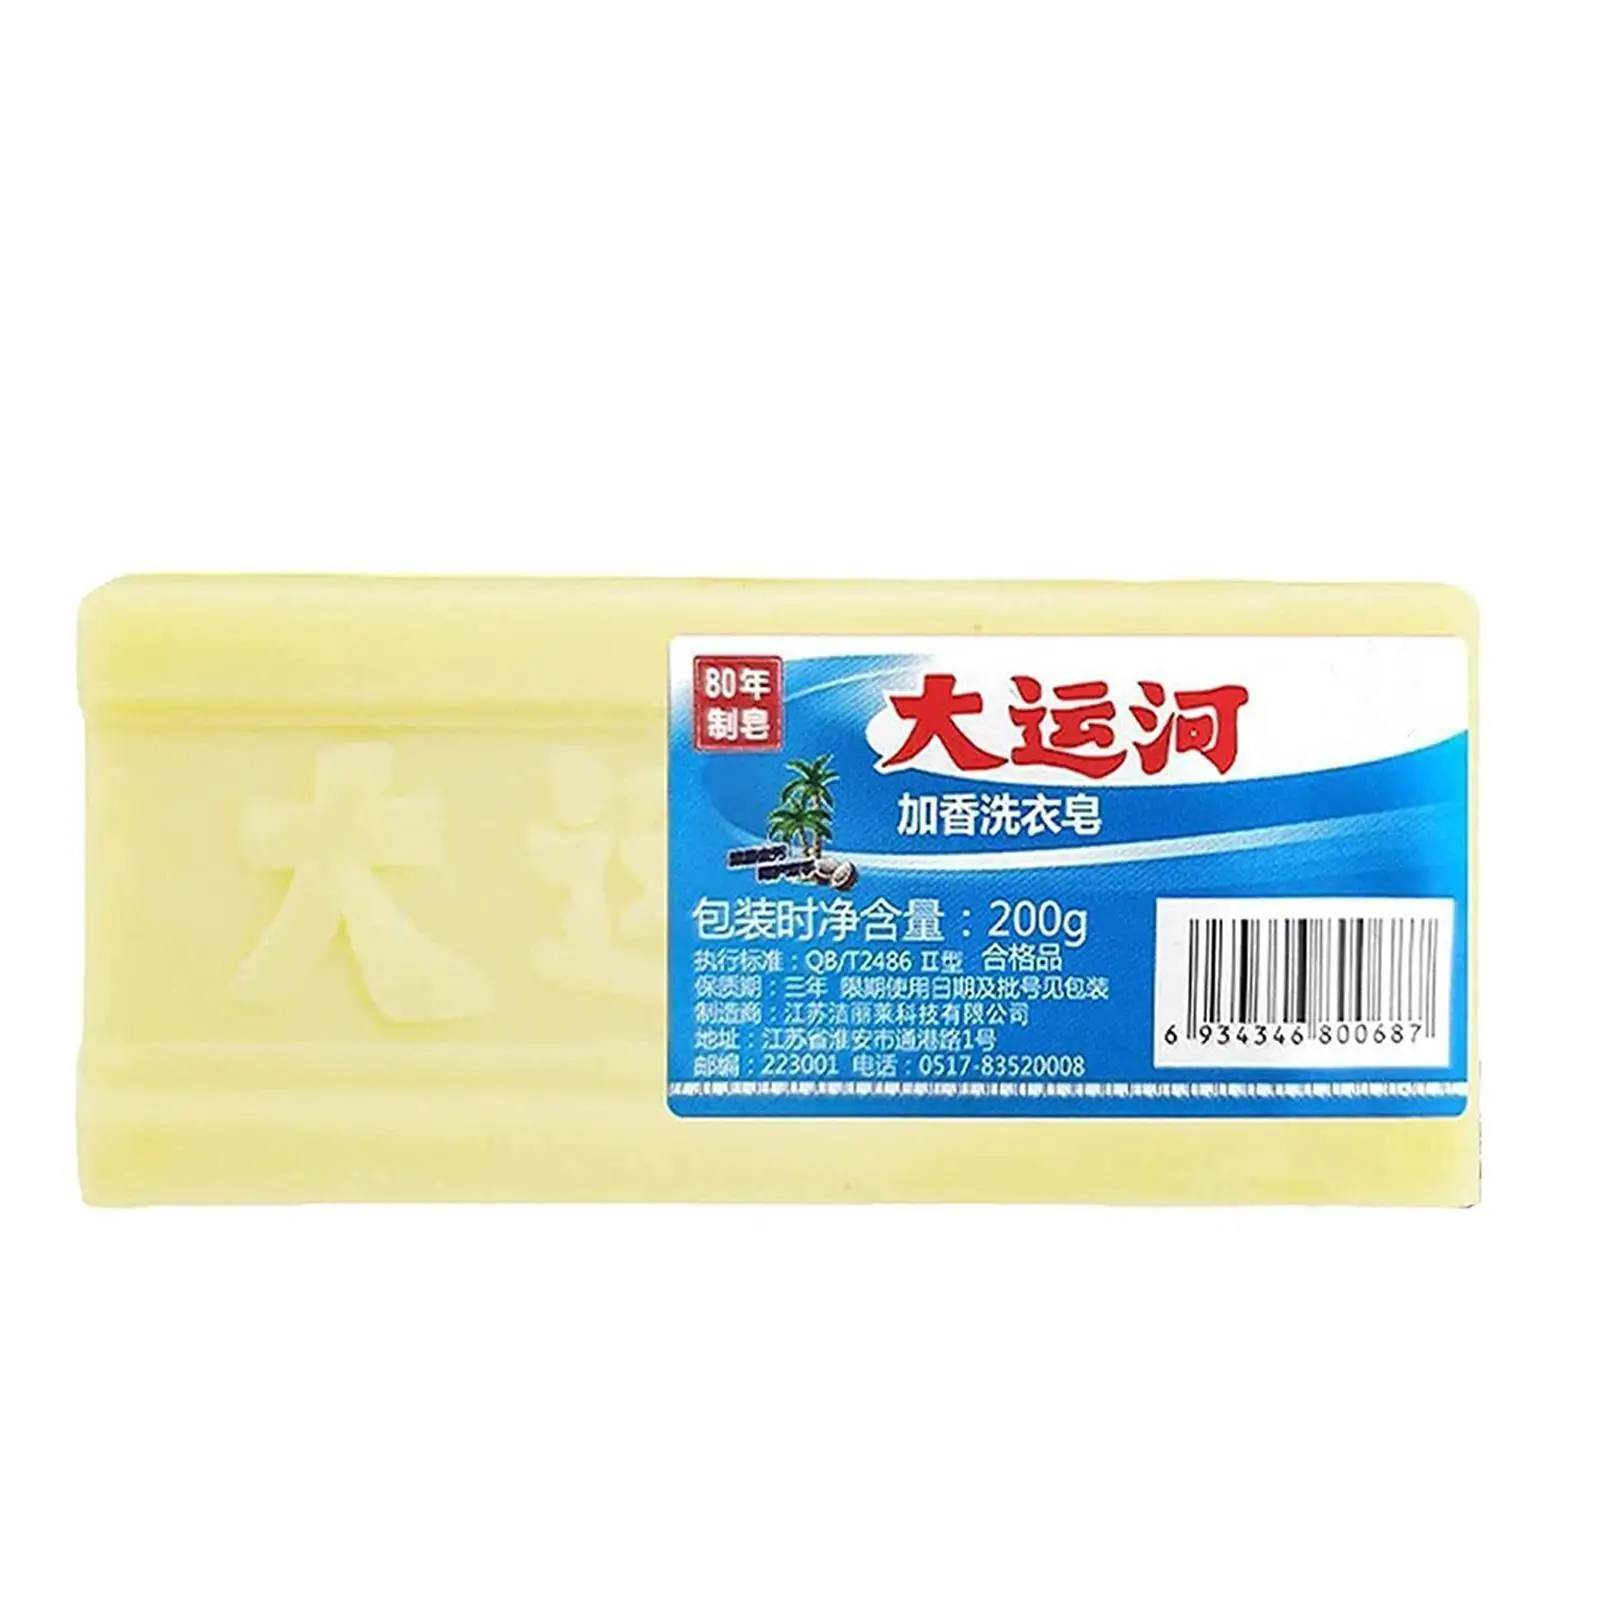 

Grand Canal Underwear Cleaning Soap Bar Natural Laundry Soap Remover Clean Old Soap For Deep Cleaning Underwear Acarus Killing